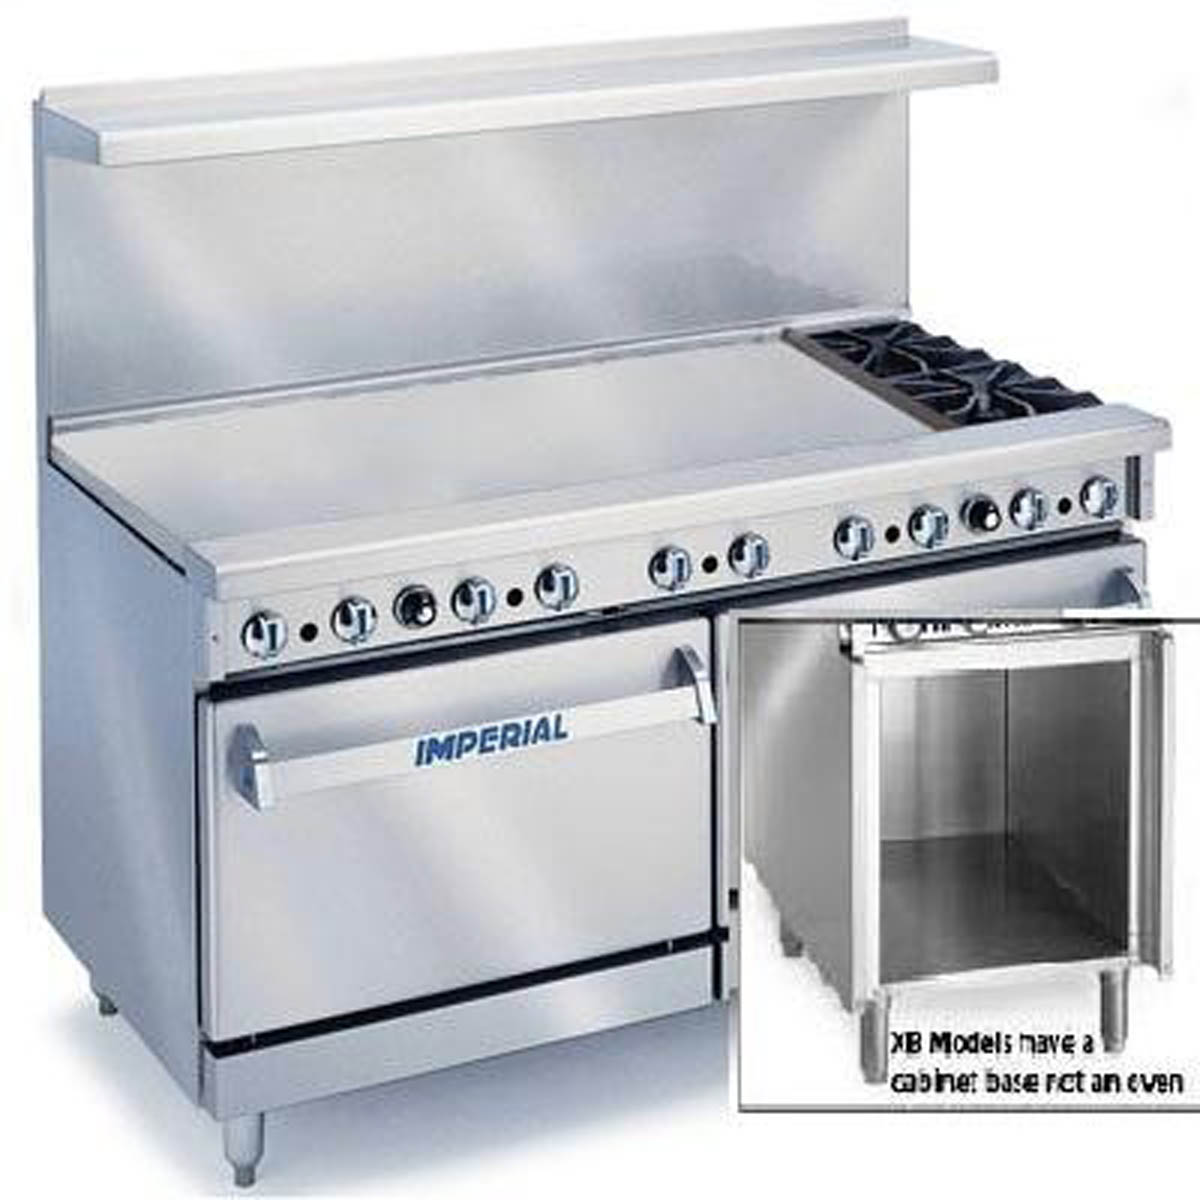 Imperial IR-2-G48-C-XB 60“ Gas Restaurant Range w/ 2 Open Burners, 48“ Griddle, Convection Oven, Open Cabinet